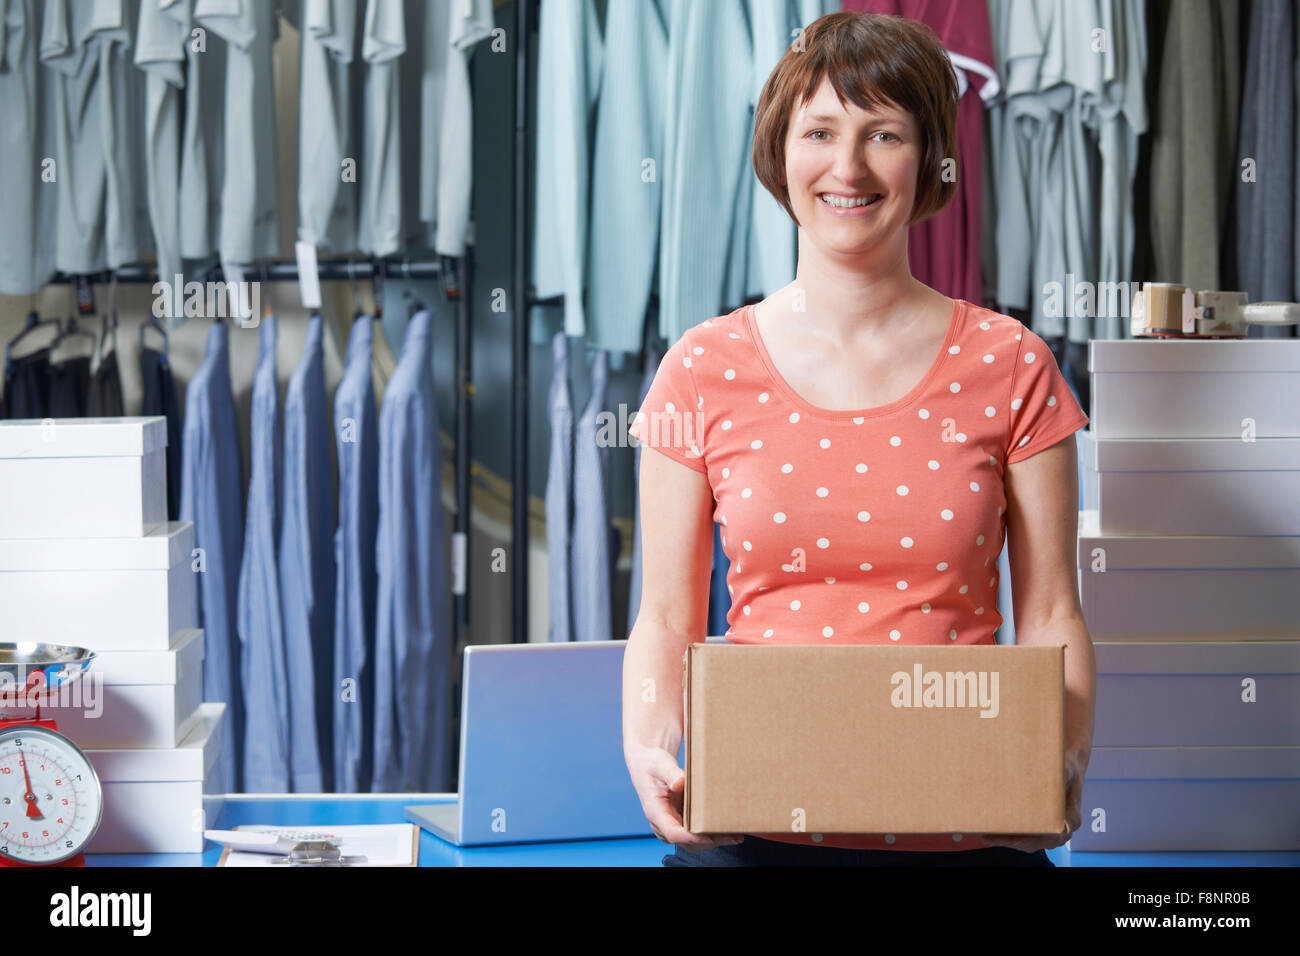 Woman Running On line Clothing Business Stock Photo